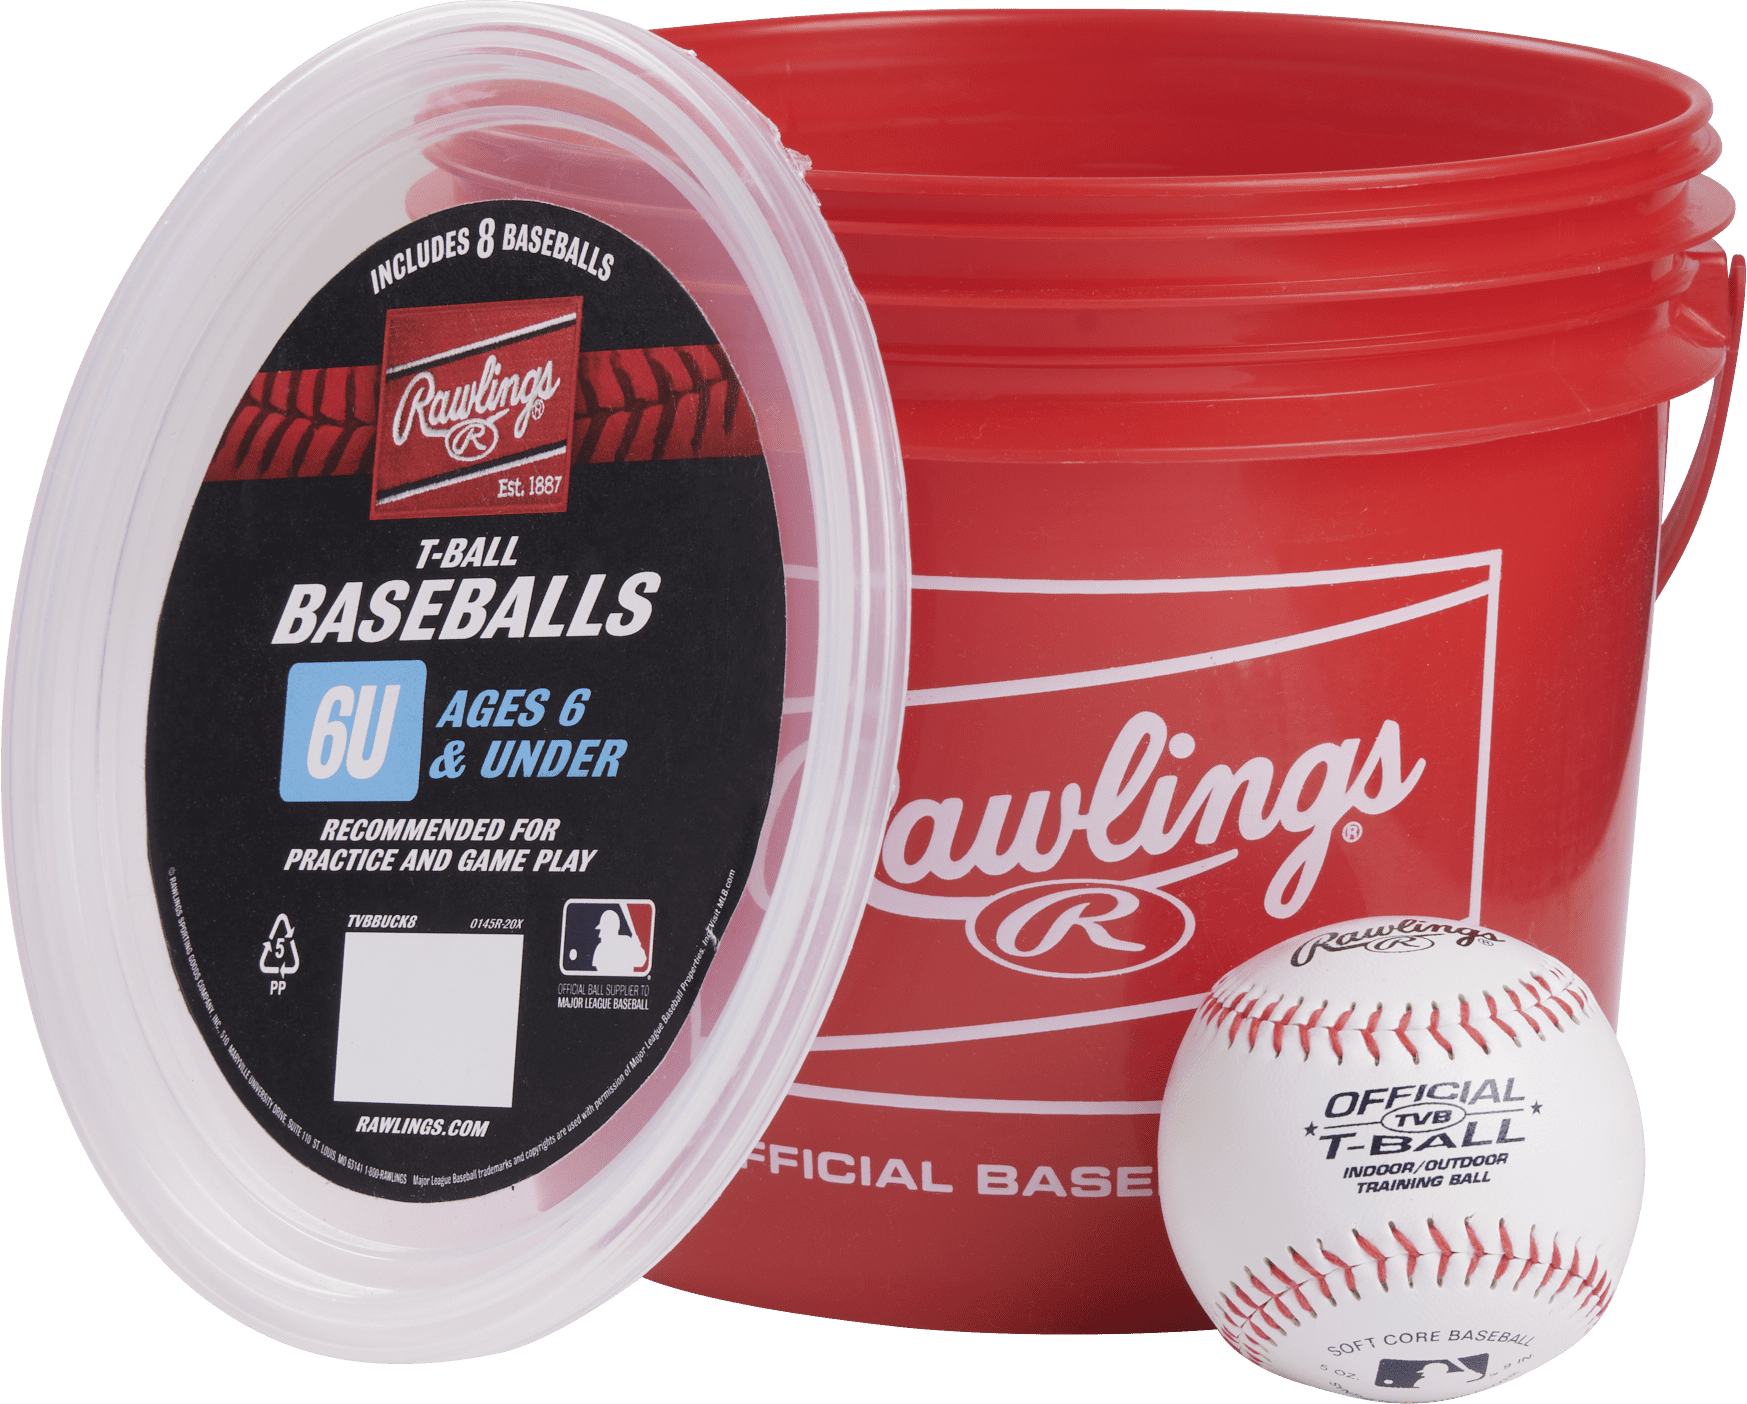 Rawlings Bucket of 8 Official League Olb3 Baseballs Sports Equipment for sale online 